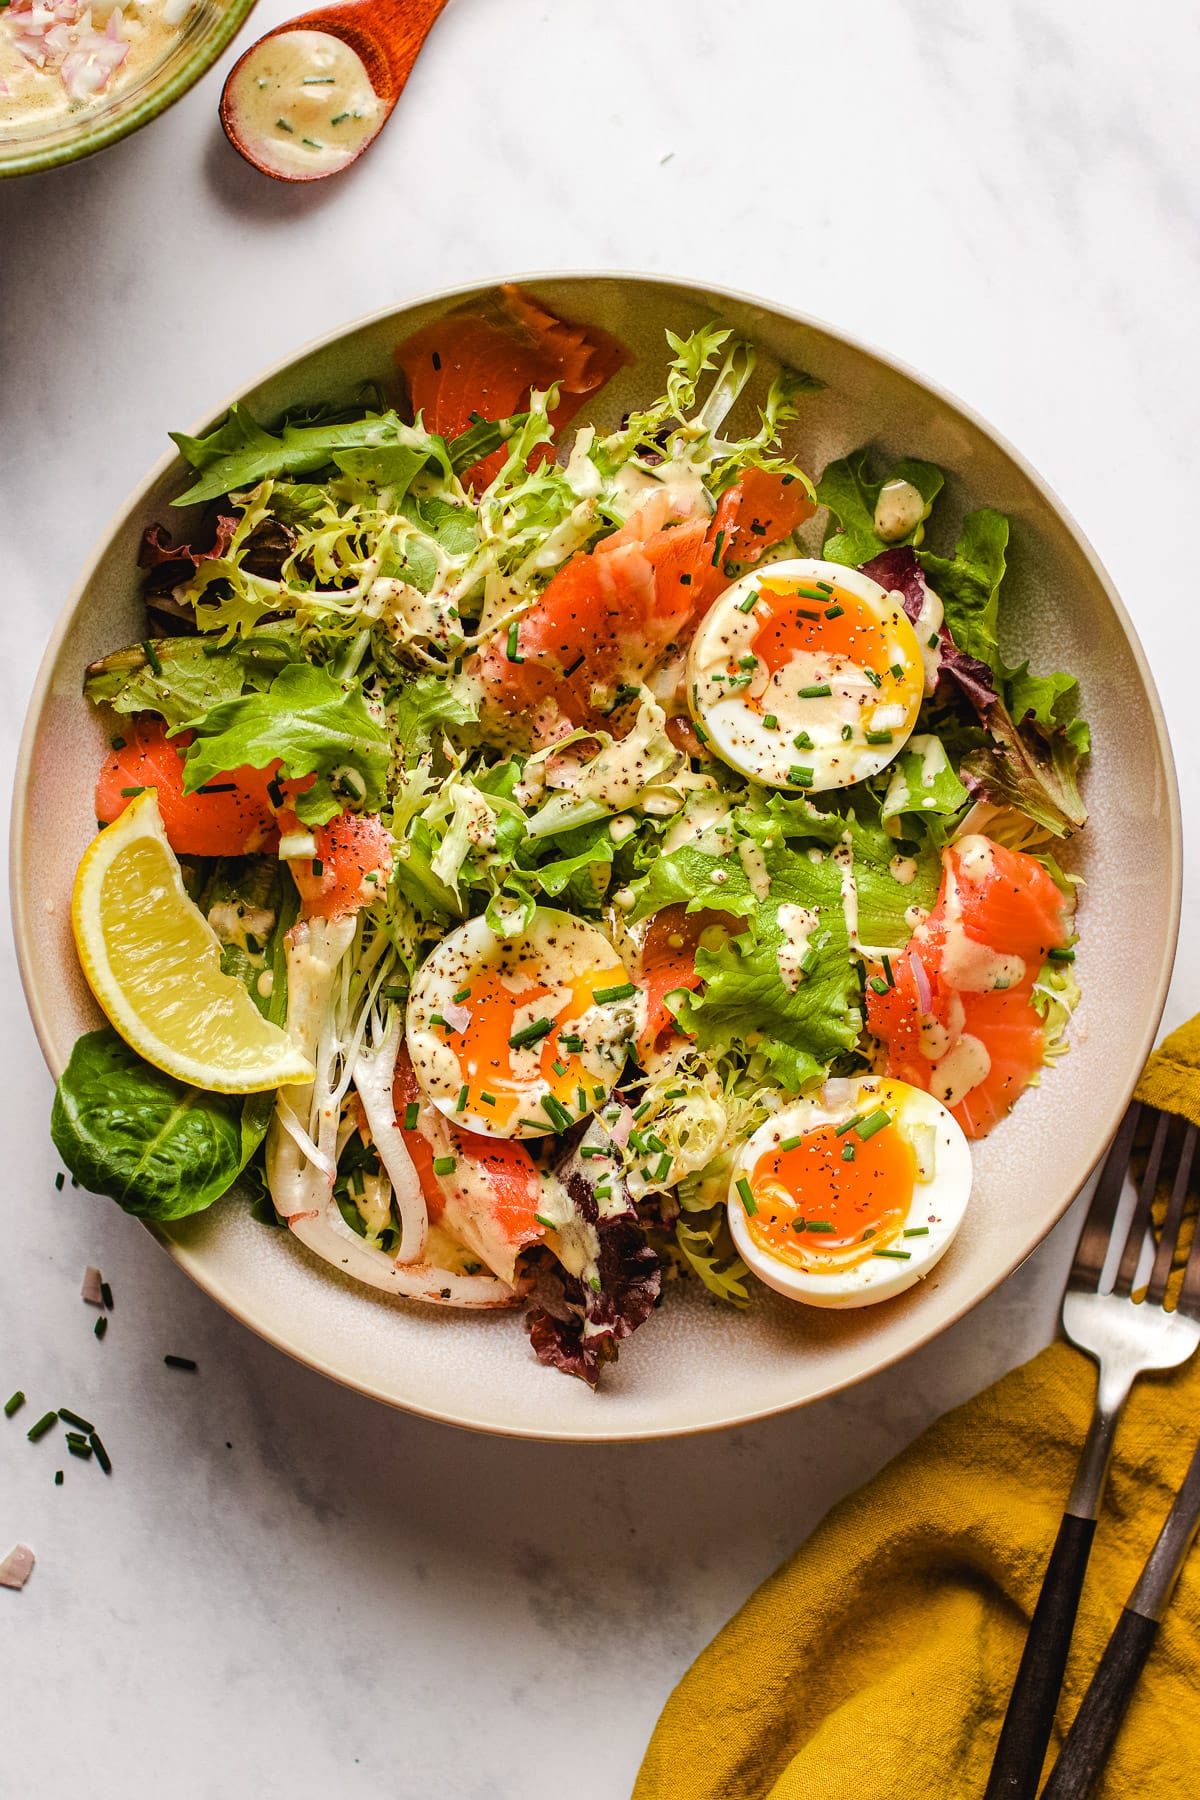 Feature image shows smoked salmon on a bed of crisp baby greens with soft boiled eggs and drizzled with caper chive dressing sauce.